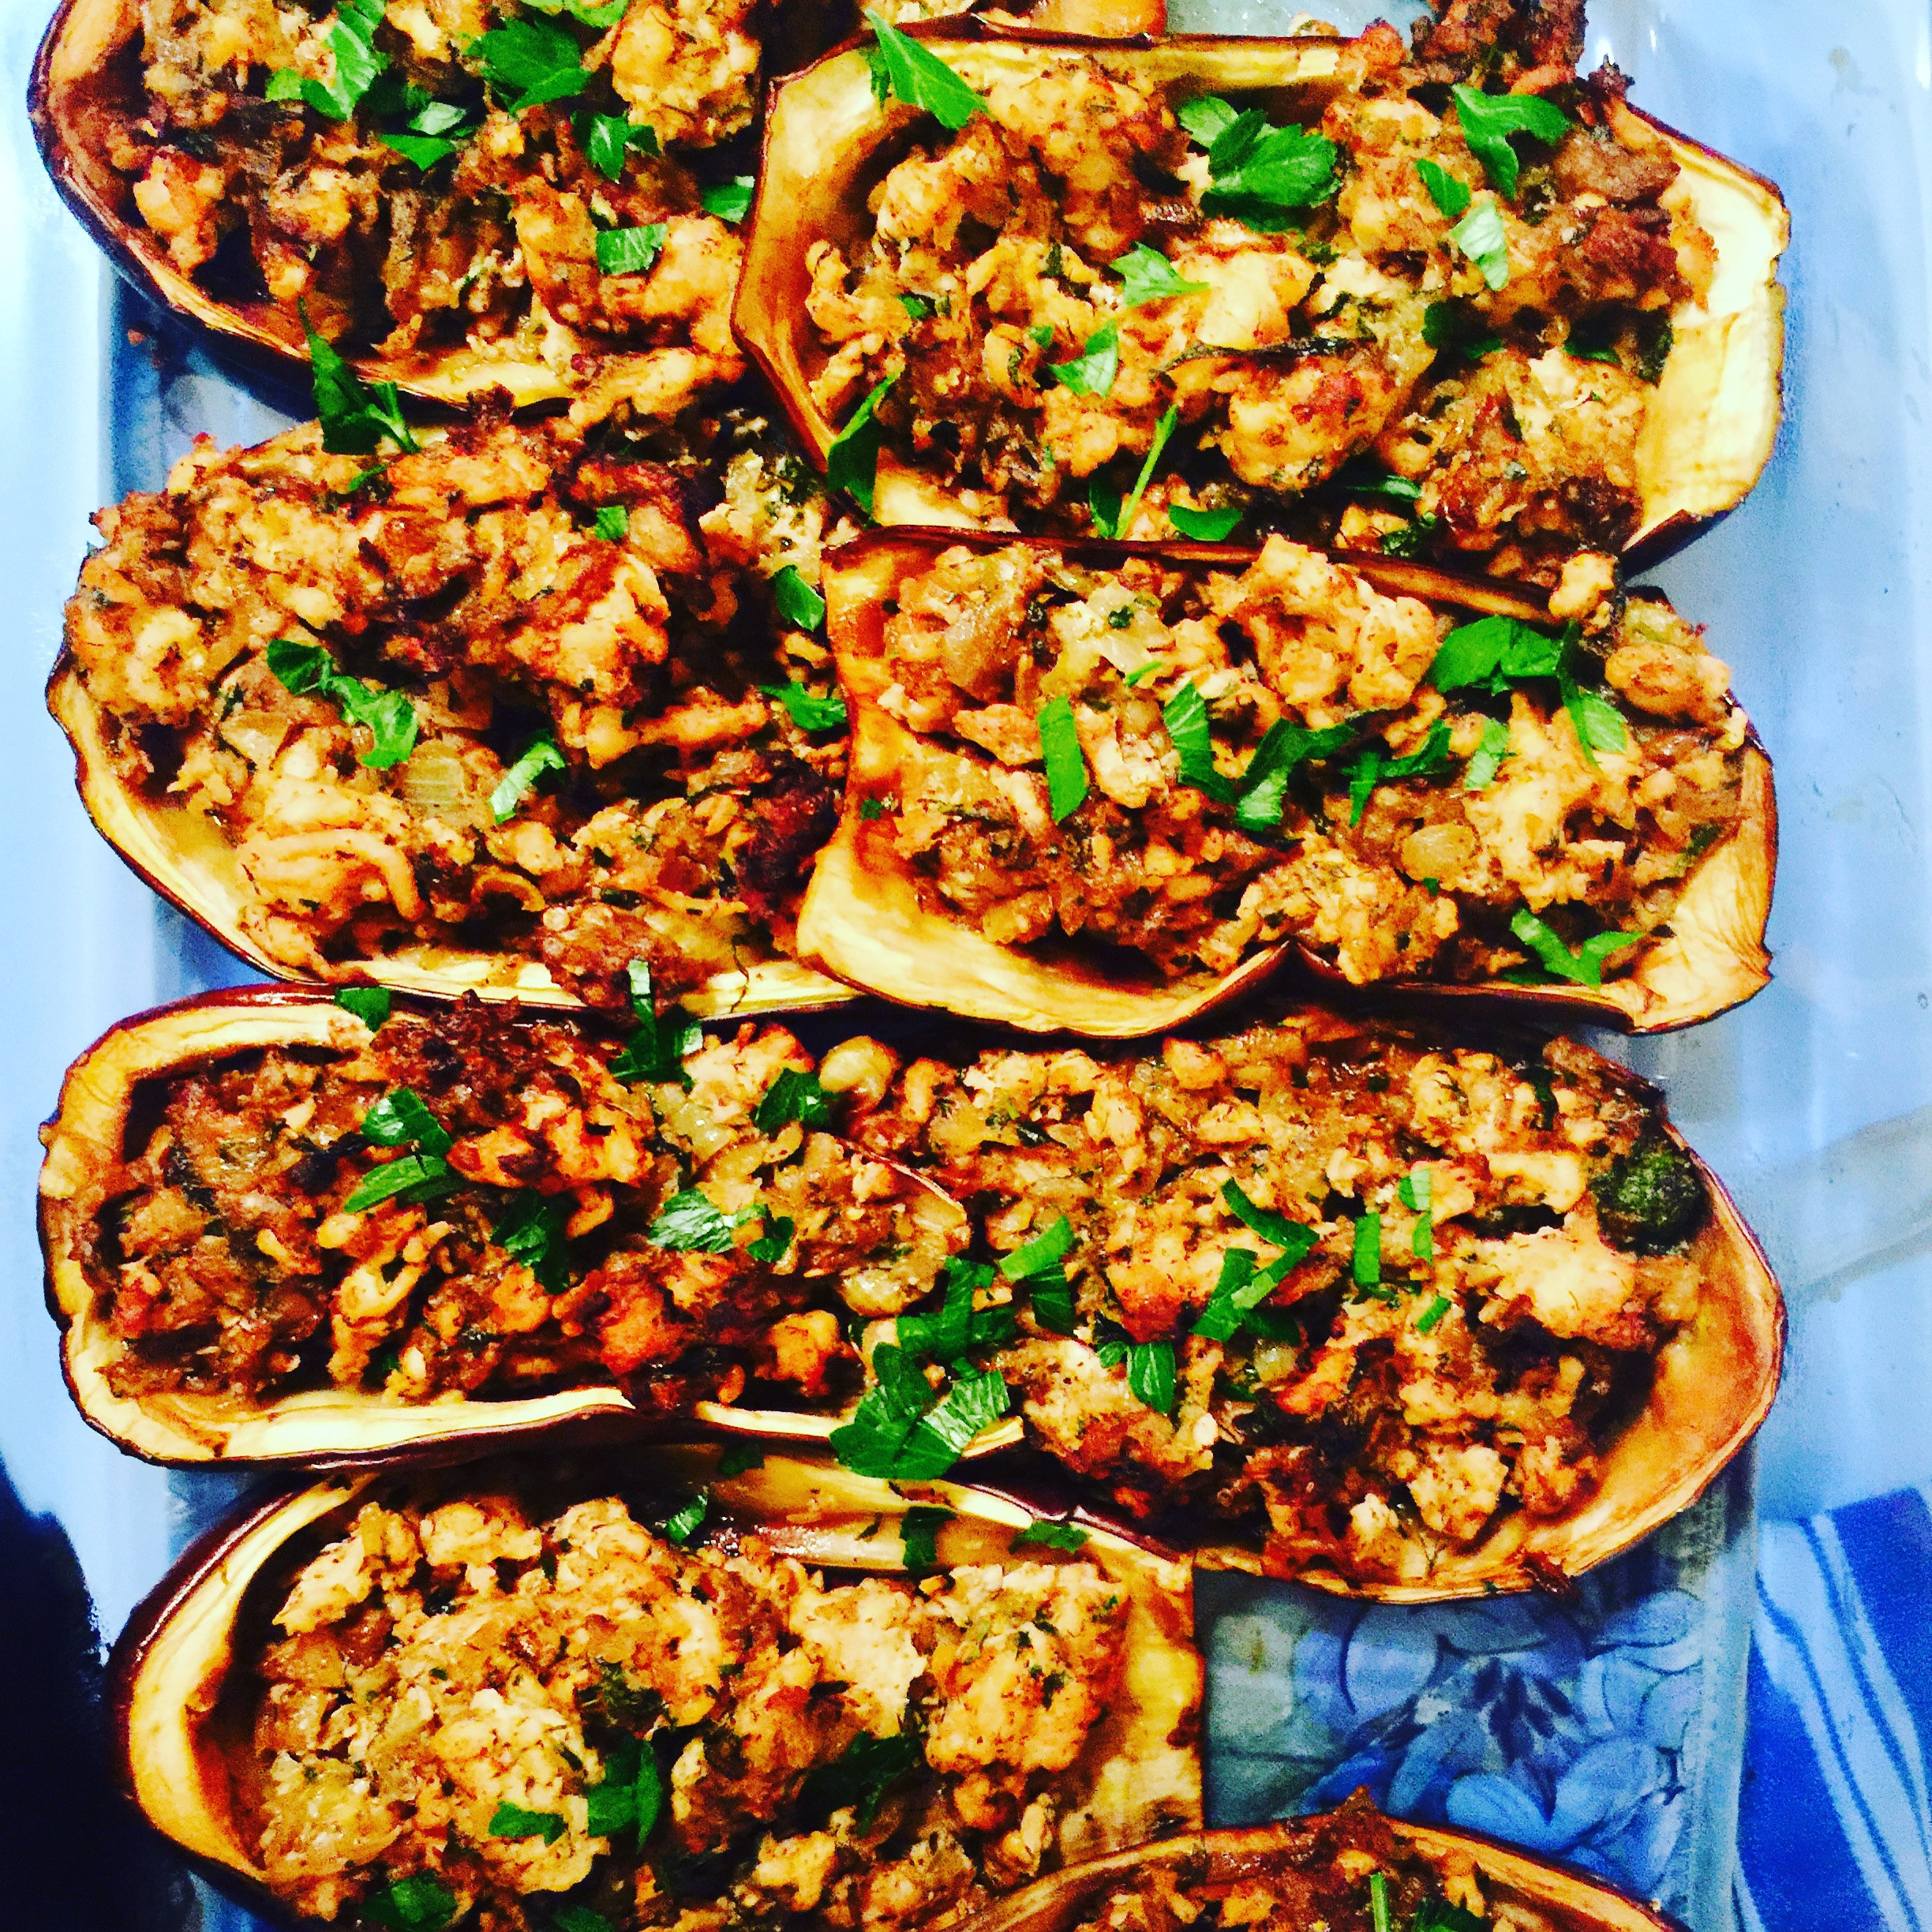 Stuffed Eggplant Recipes
 Stuffed Eggplant with Ground Chicken My Halal Kitchen by